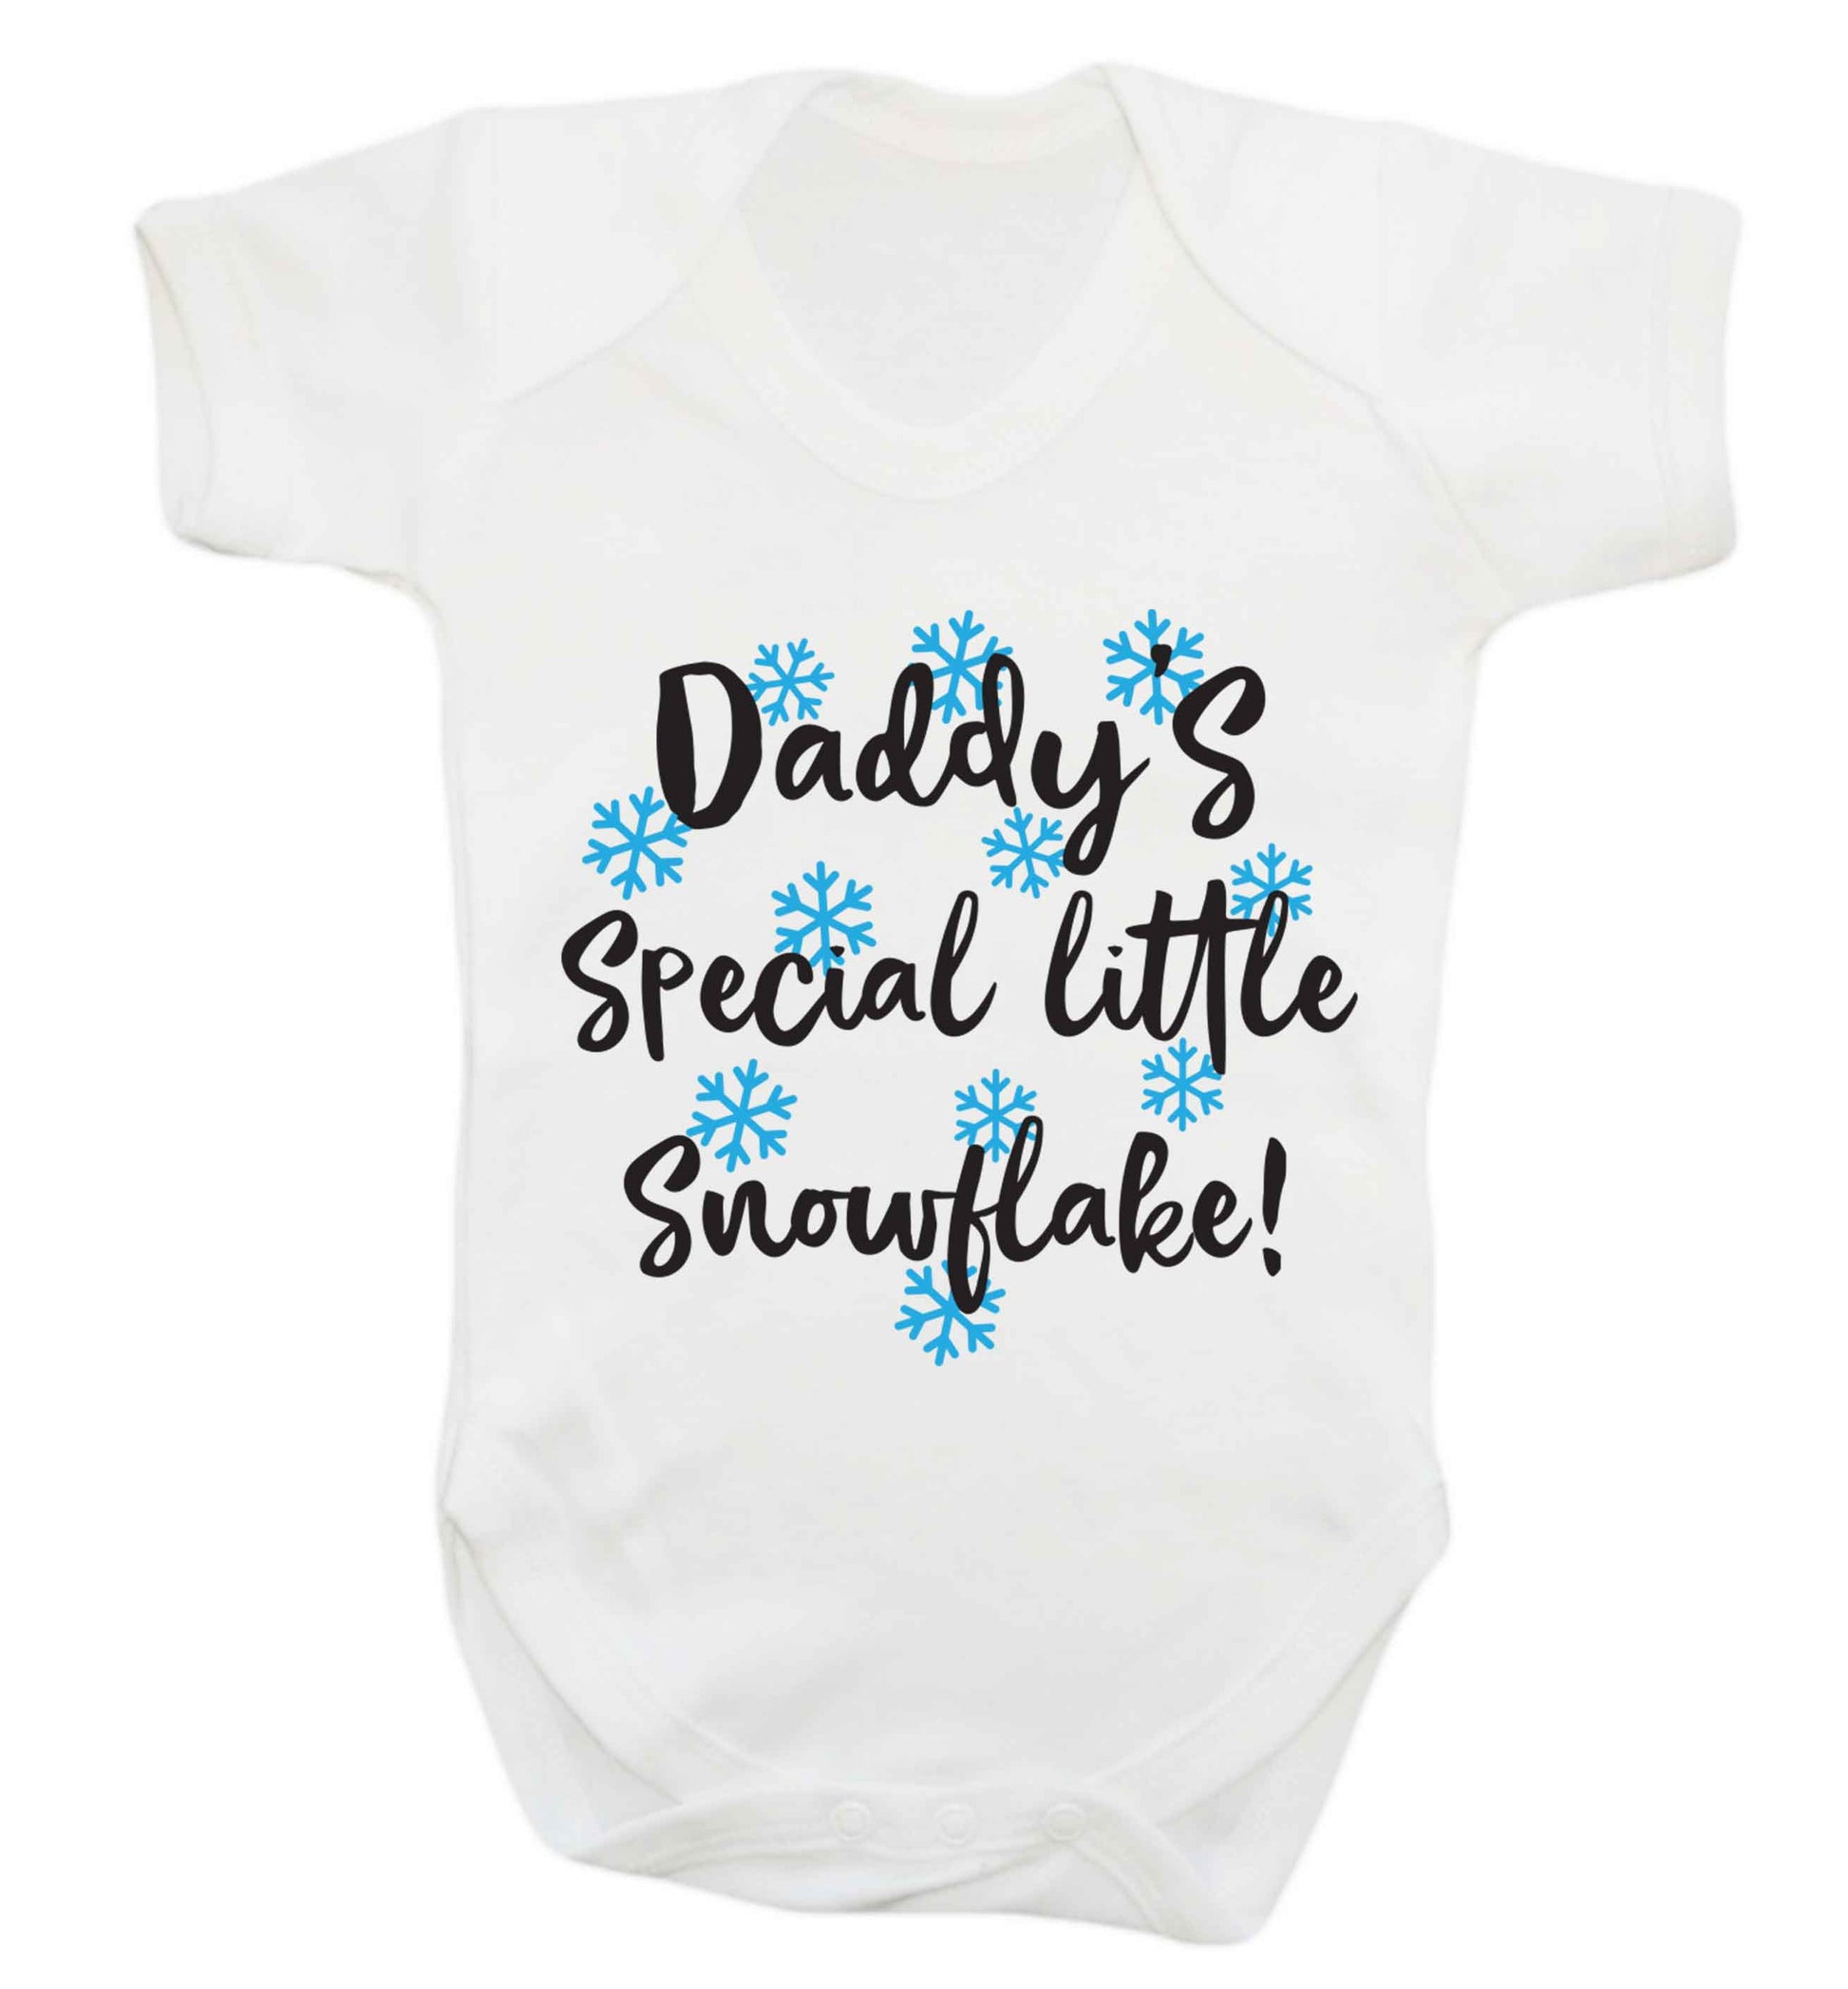 Daddy's special little snowflake Baby Vest white 18-24 months